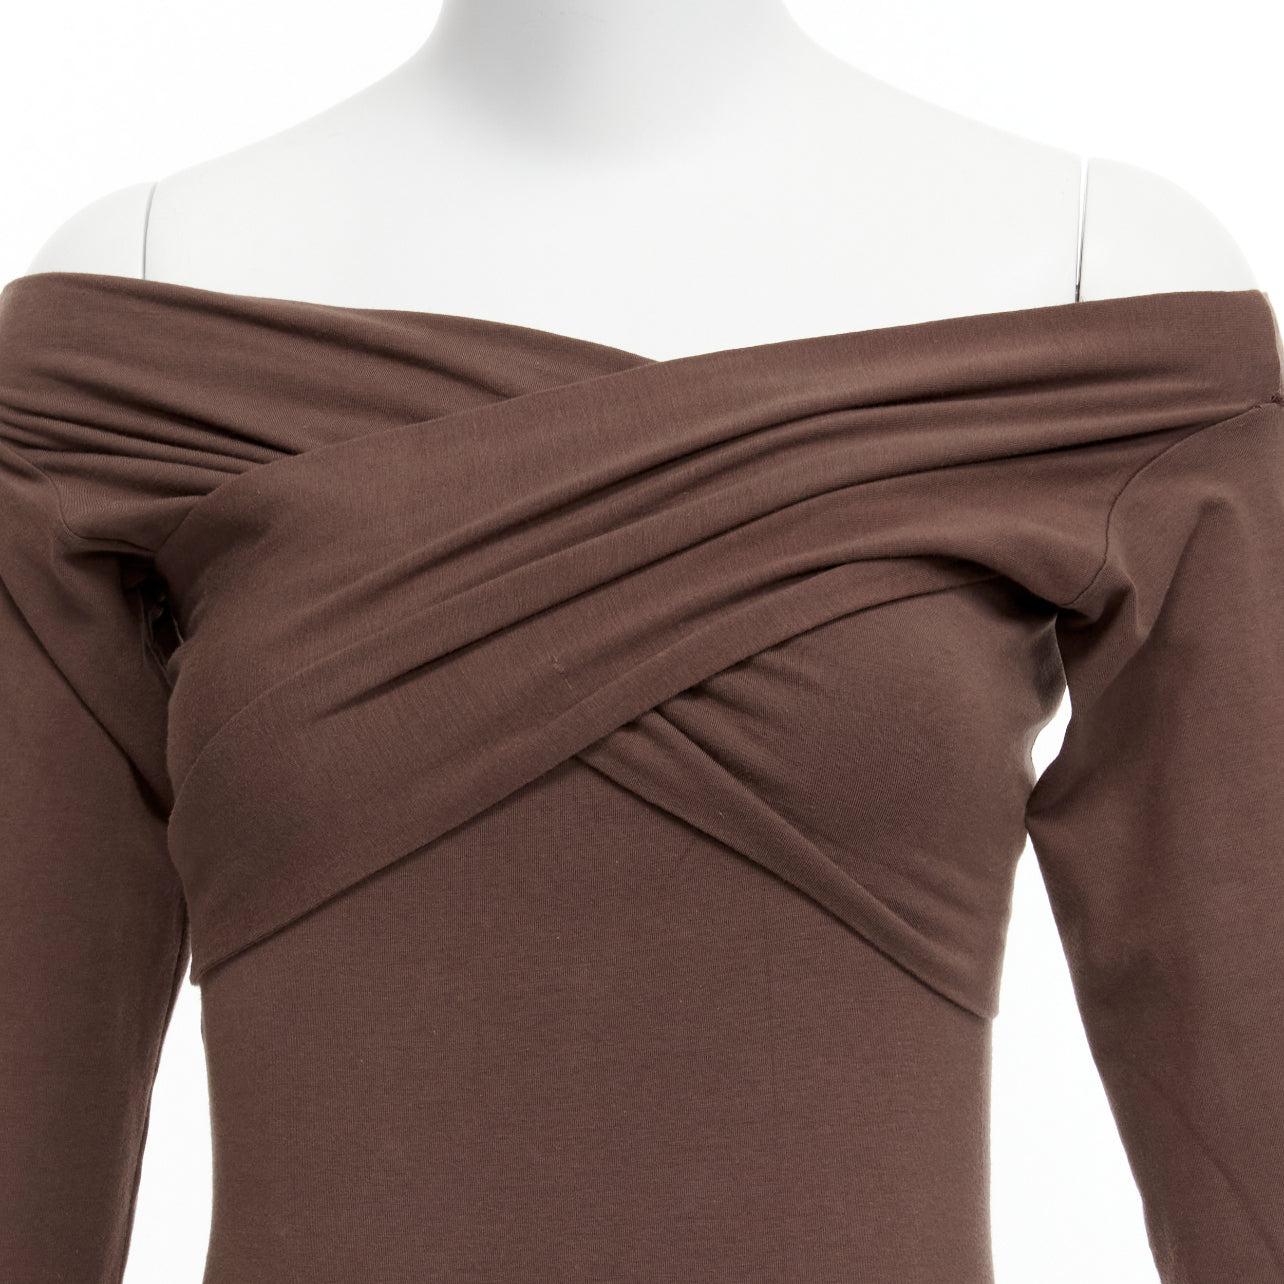 ROMEO GIGLI Vintage brown cotton bend criss cross off shoulder bodycon dress IT40 S
Reference: PYCN/A00097
Brand: Romeo Gigli
Material: Cotton, Blend
Color: Brown
Pattern: Solid
Closure: Pullover
Extra Details: 2 pieces worn as a dress.
Made in: